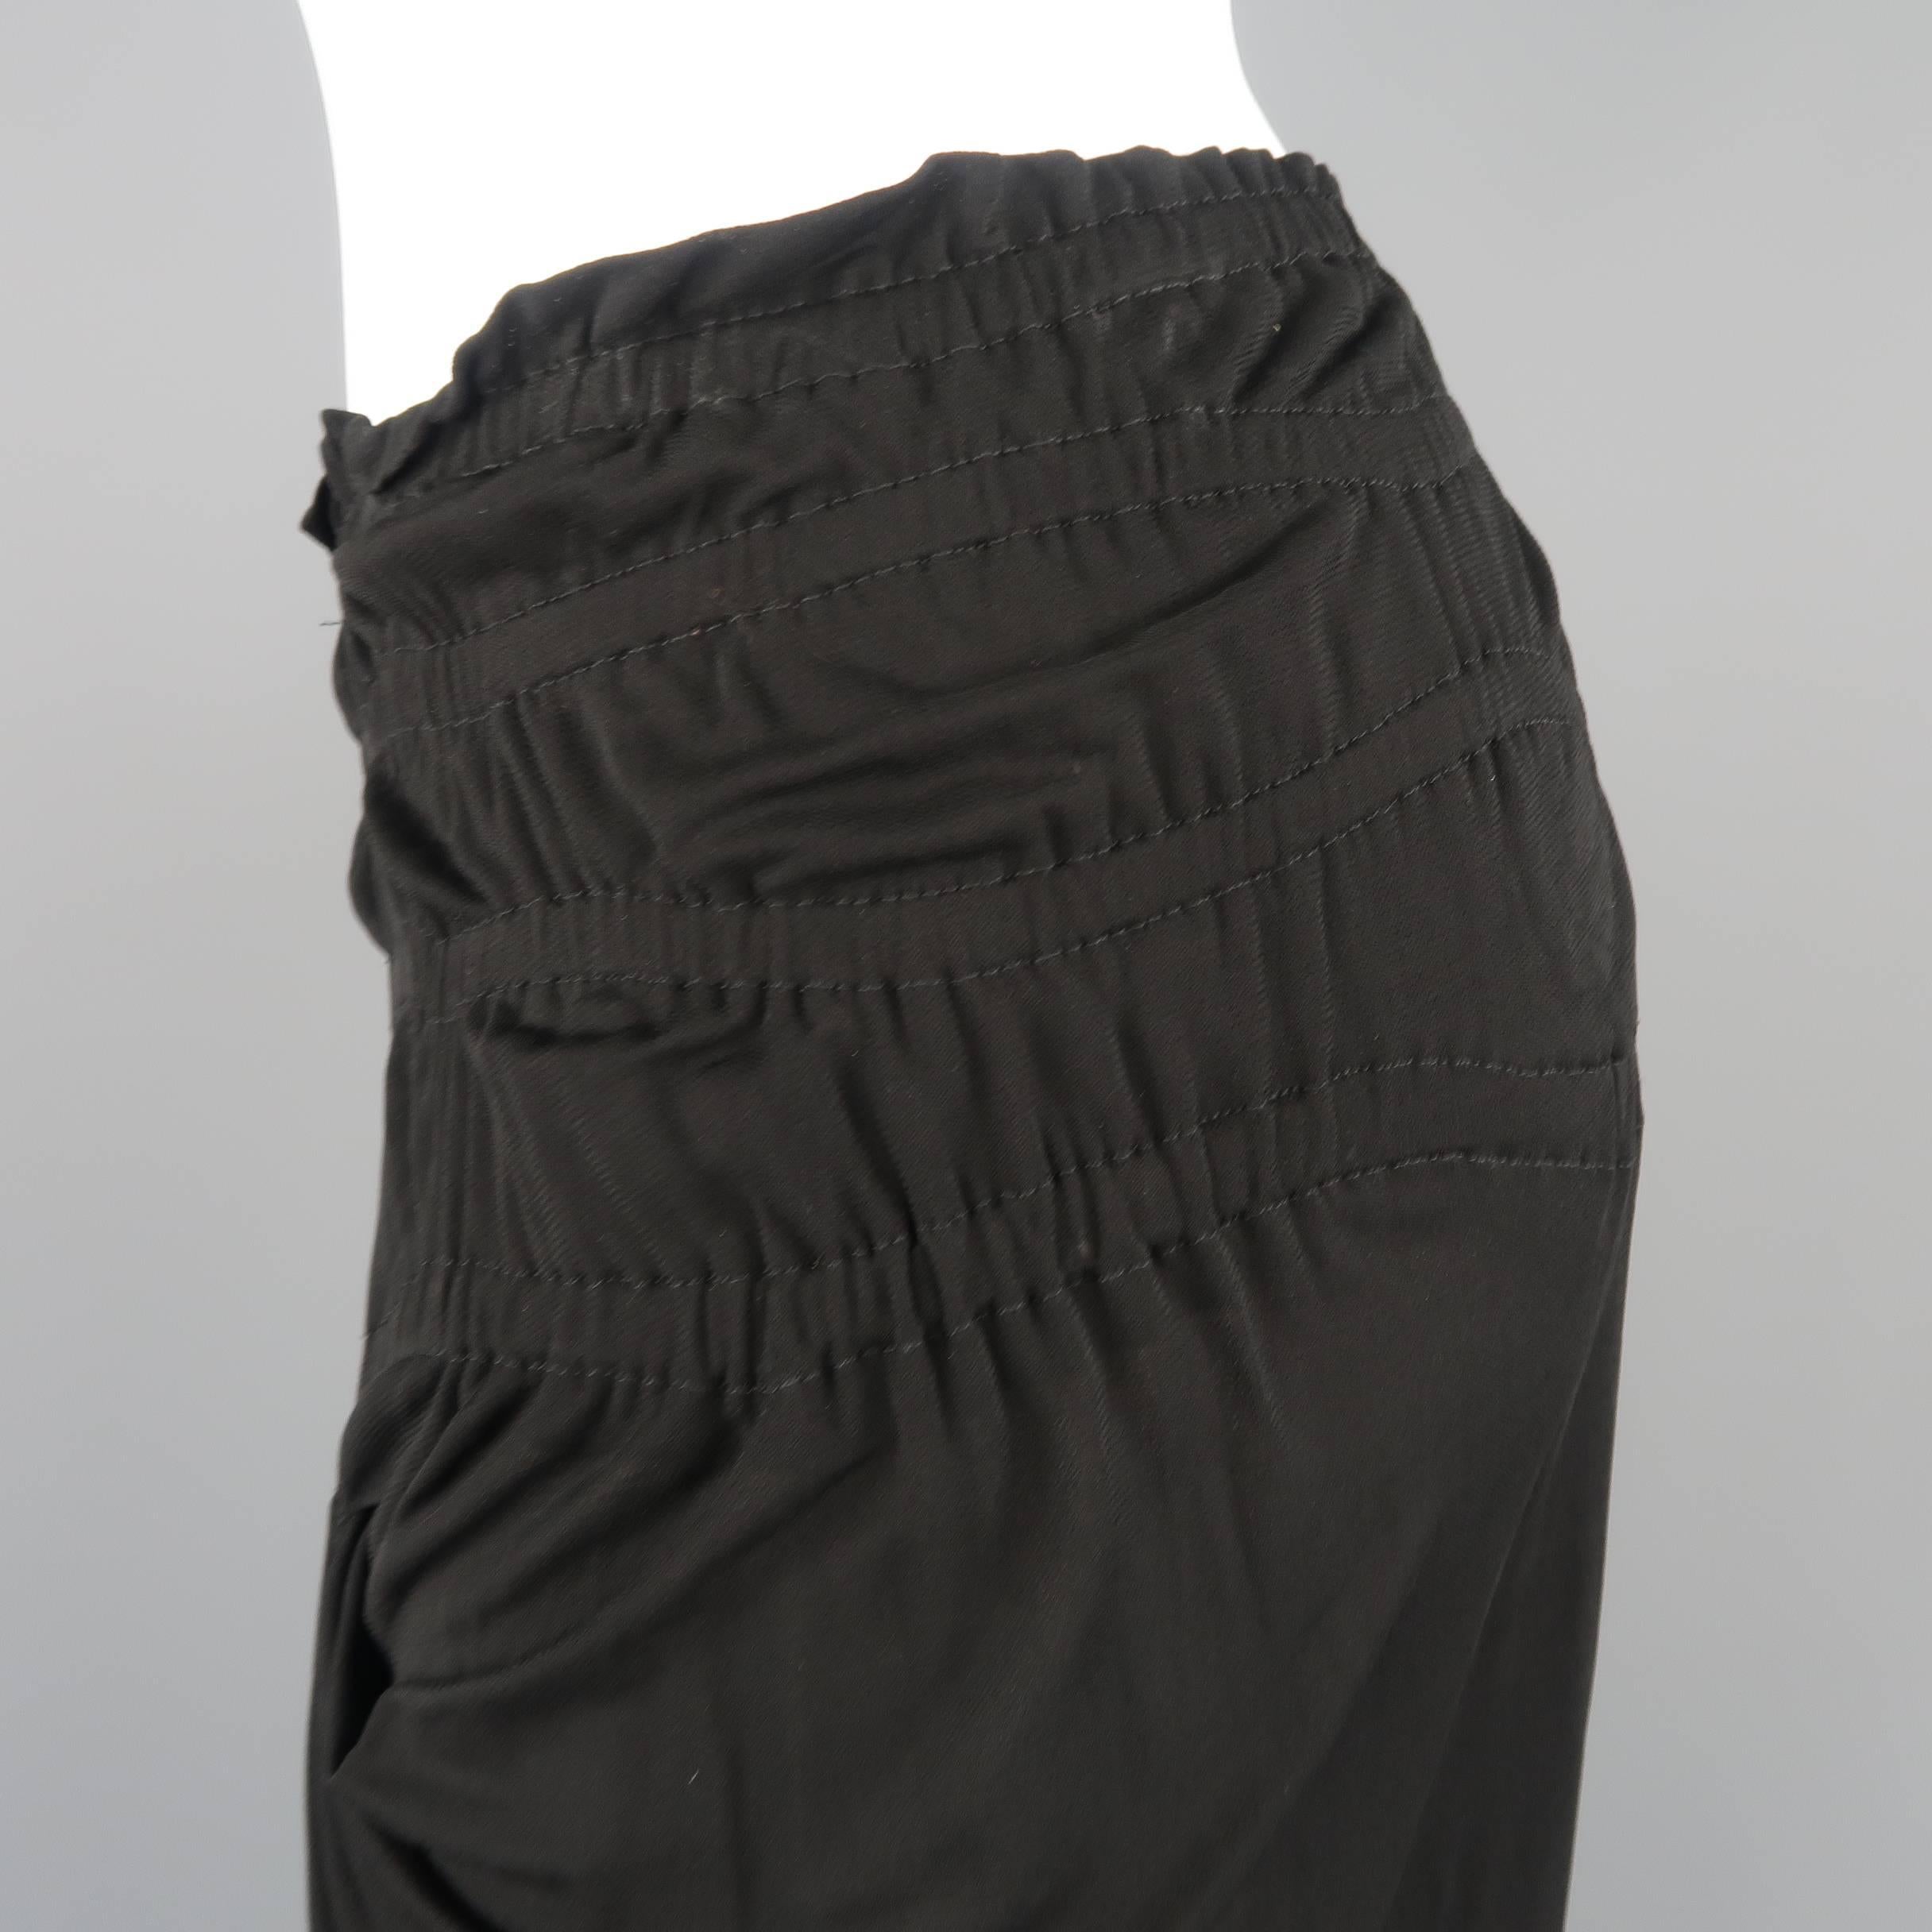 YVES SAINT LAURENT by TOM FORD Size M Black Gathered Viscose Ruffle Skirt 2